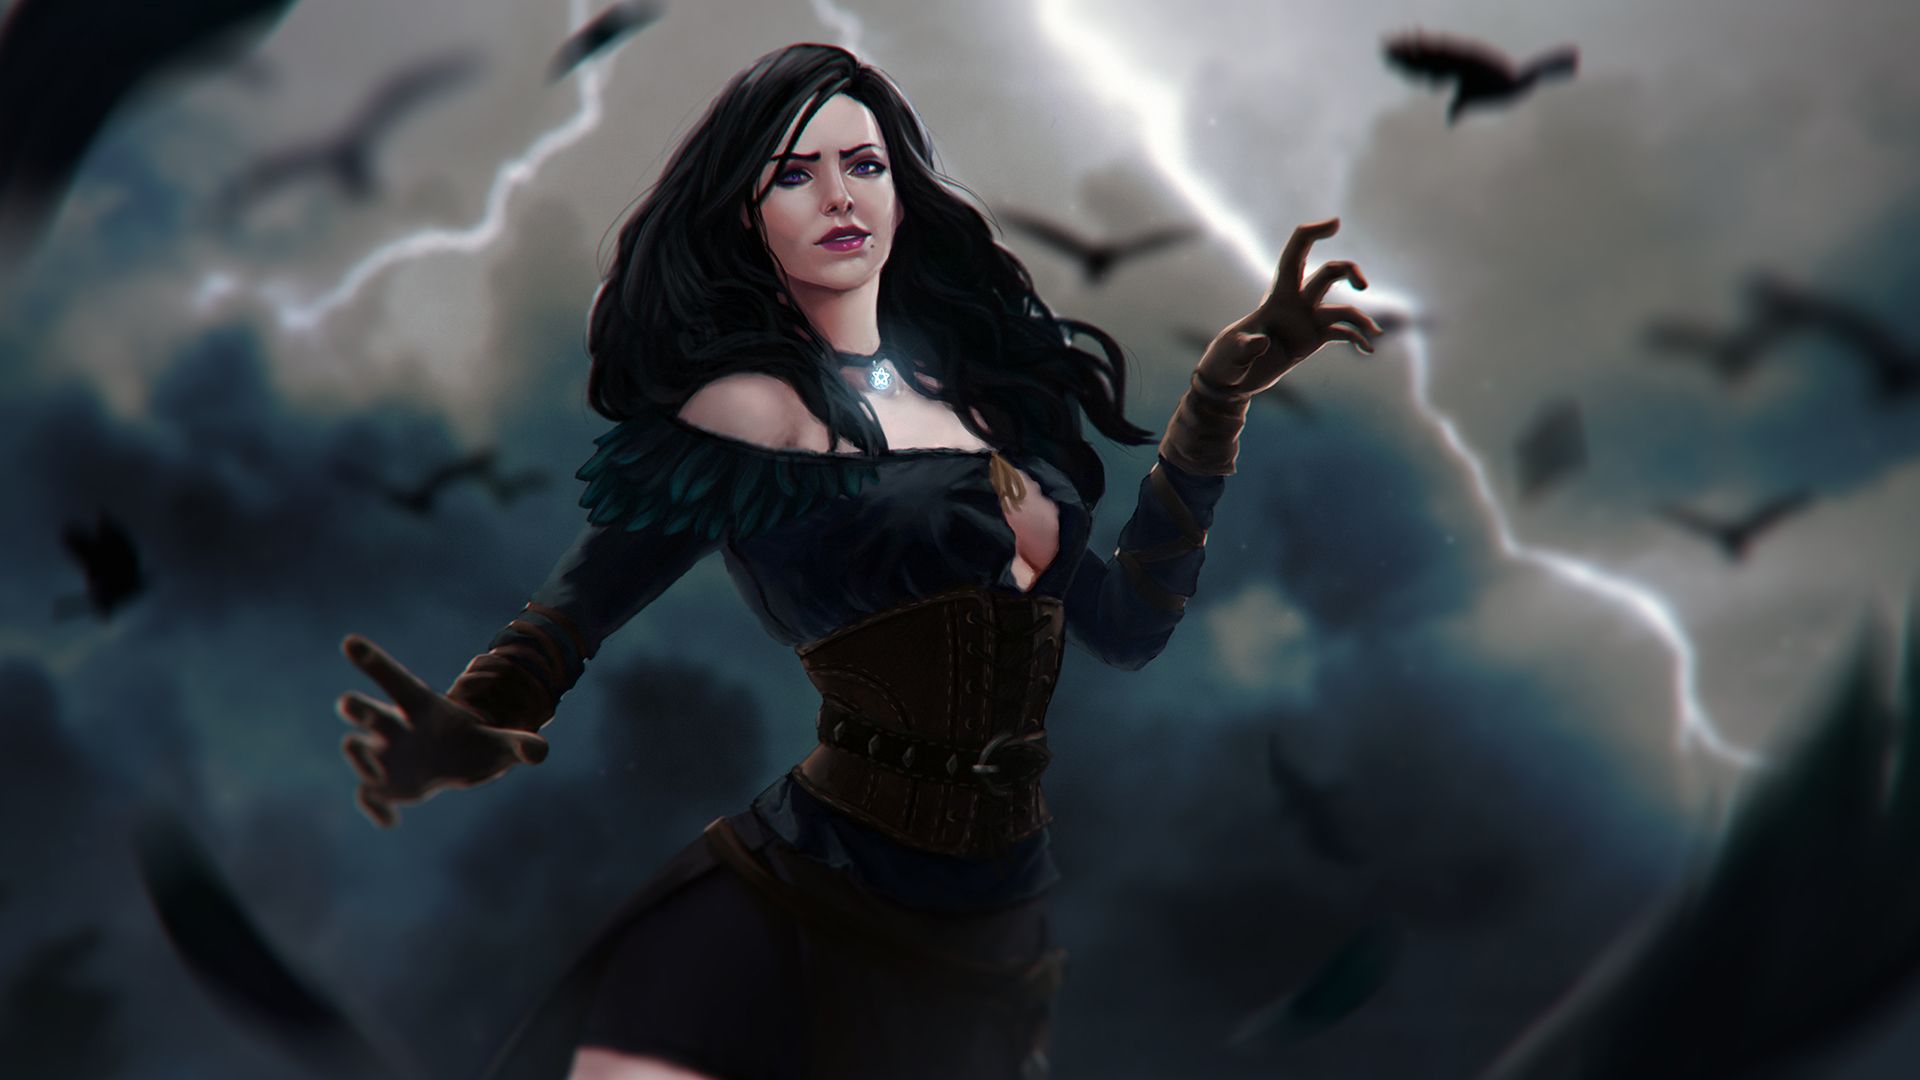 Witcher Yennefer, Free Wallpaper And Background - Witcher 3 Wallpaper Yennefer - HD Wallpaper 